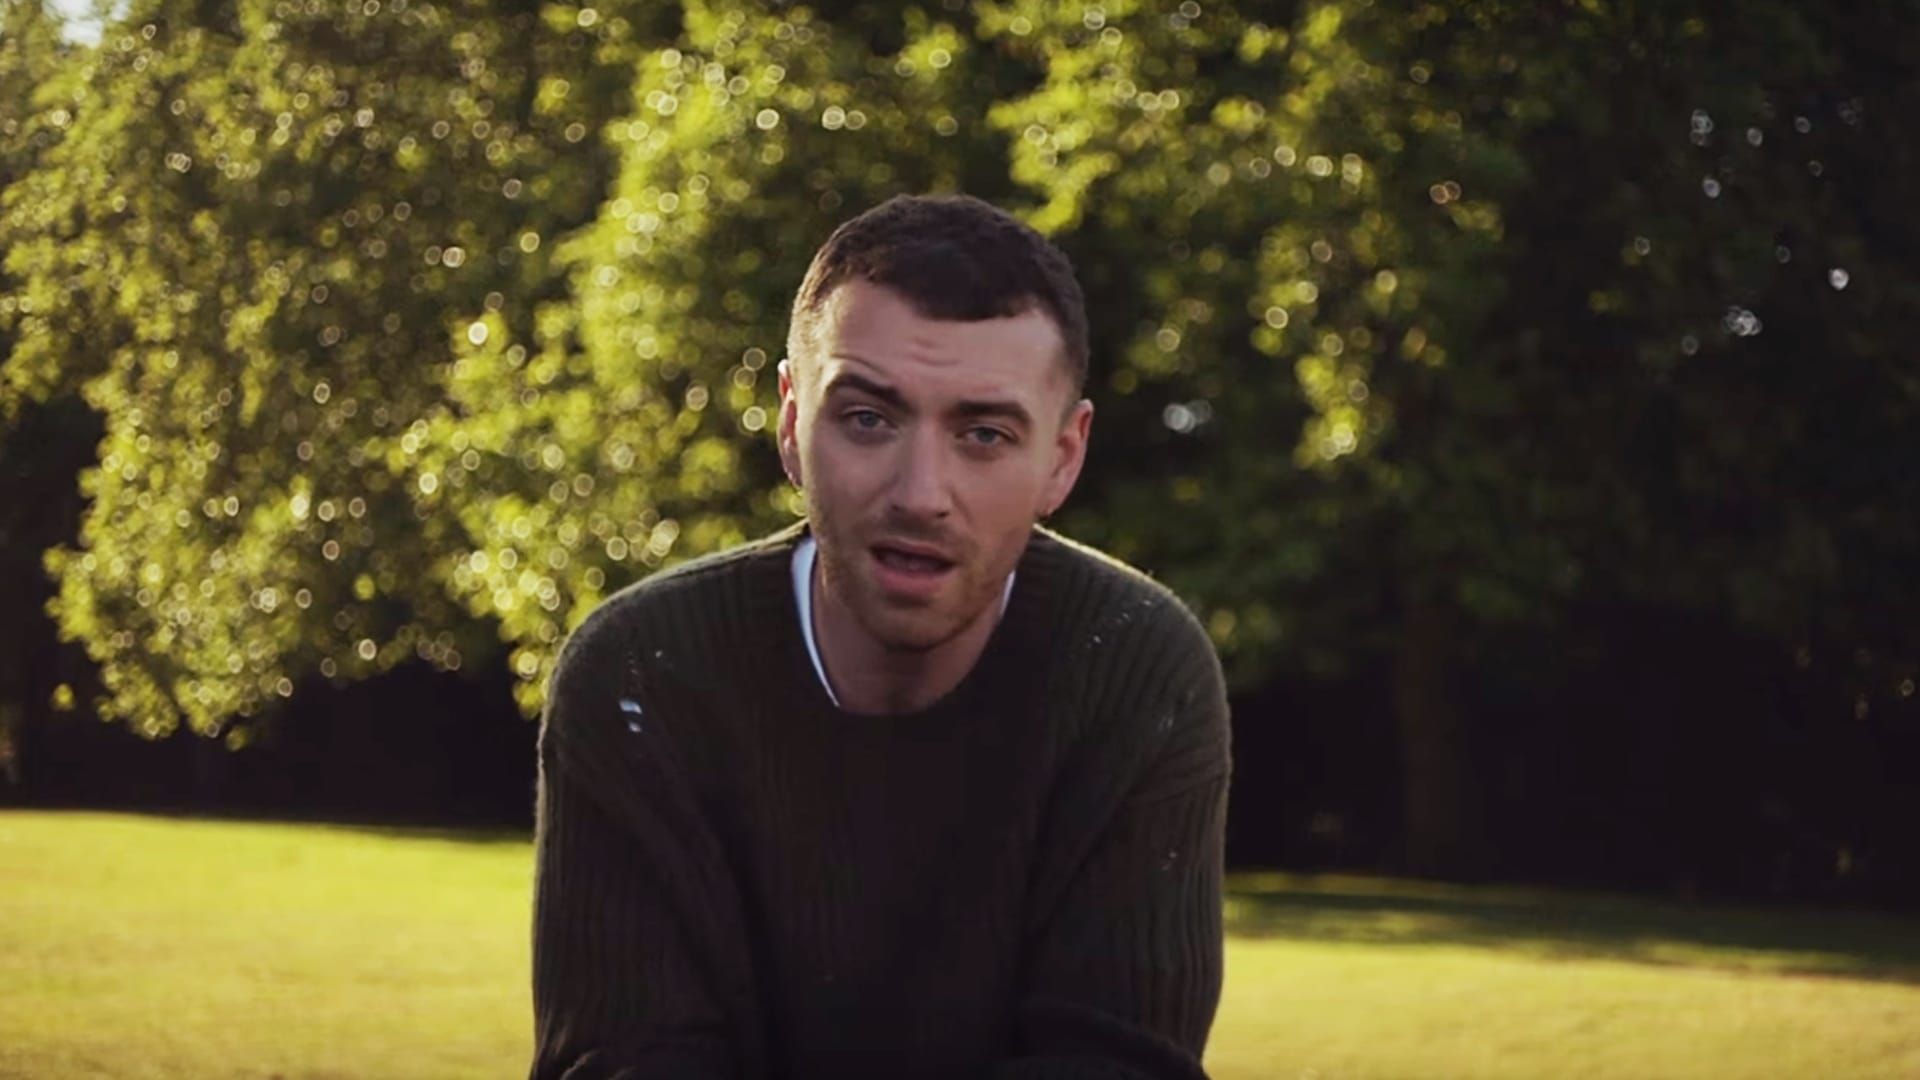 Sam Smith: On the Record background